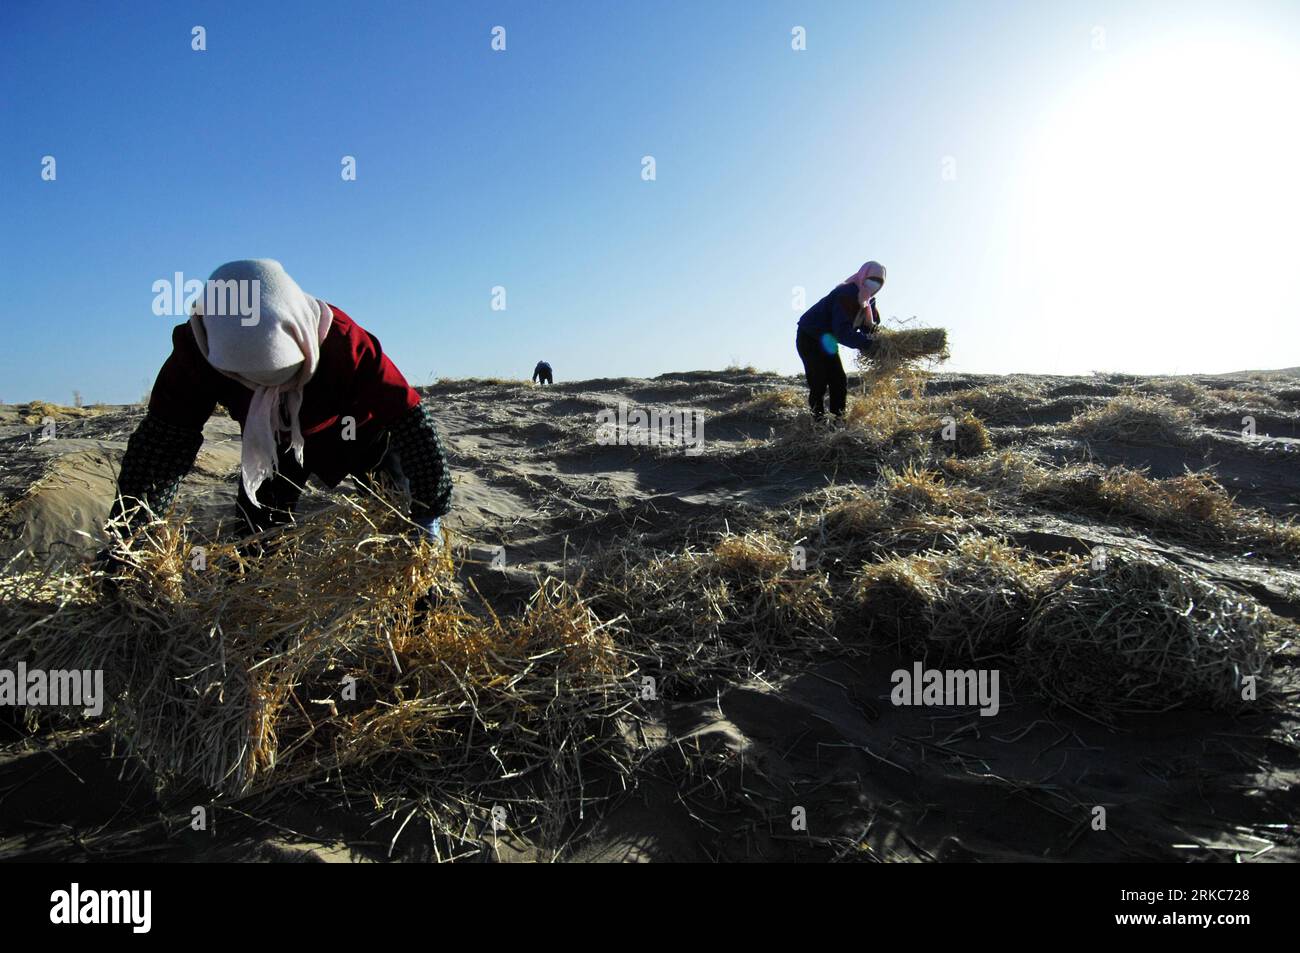 Bildnummer: 54683346  Datum: 27.11.2010  Copyright: imago/Xinhua (101129) -- MINQIN, Nov. 29, 2010 (Xinhua) -- Local farmers fixate sand with wheat straws and achnatherum stalks in the Laohukou desert in Minqin County, northwest China s Gansu Province, Nov. 27, 2010. Located in Minqin County, the Qingtu Lake, suffered from drought for over 50 years, witnessed three square kilometers of water surface again after 8.6 million cubic meters of water from Shiyang River were infused into the lake by the end of October this year. Extensive farming since the 1950s sapped underground water in Minqin and Stock Photo